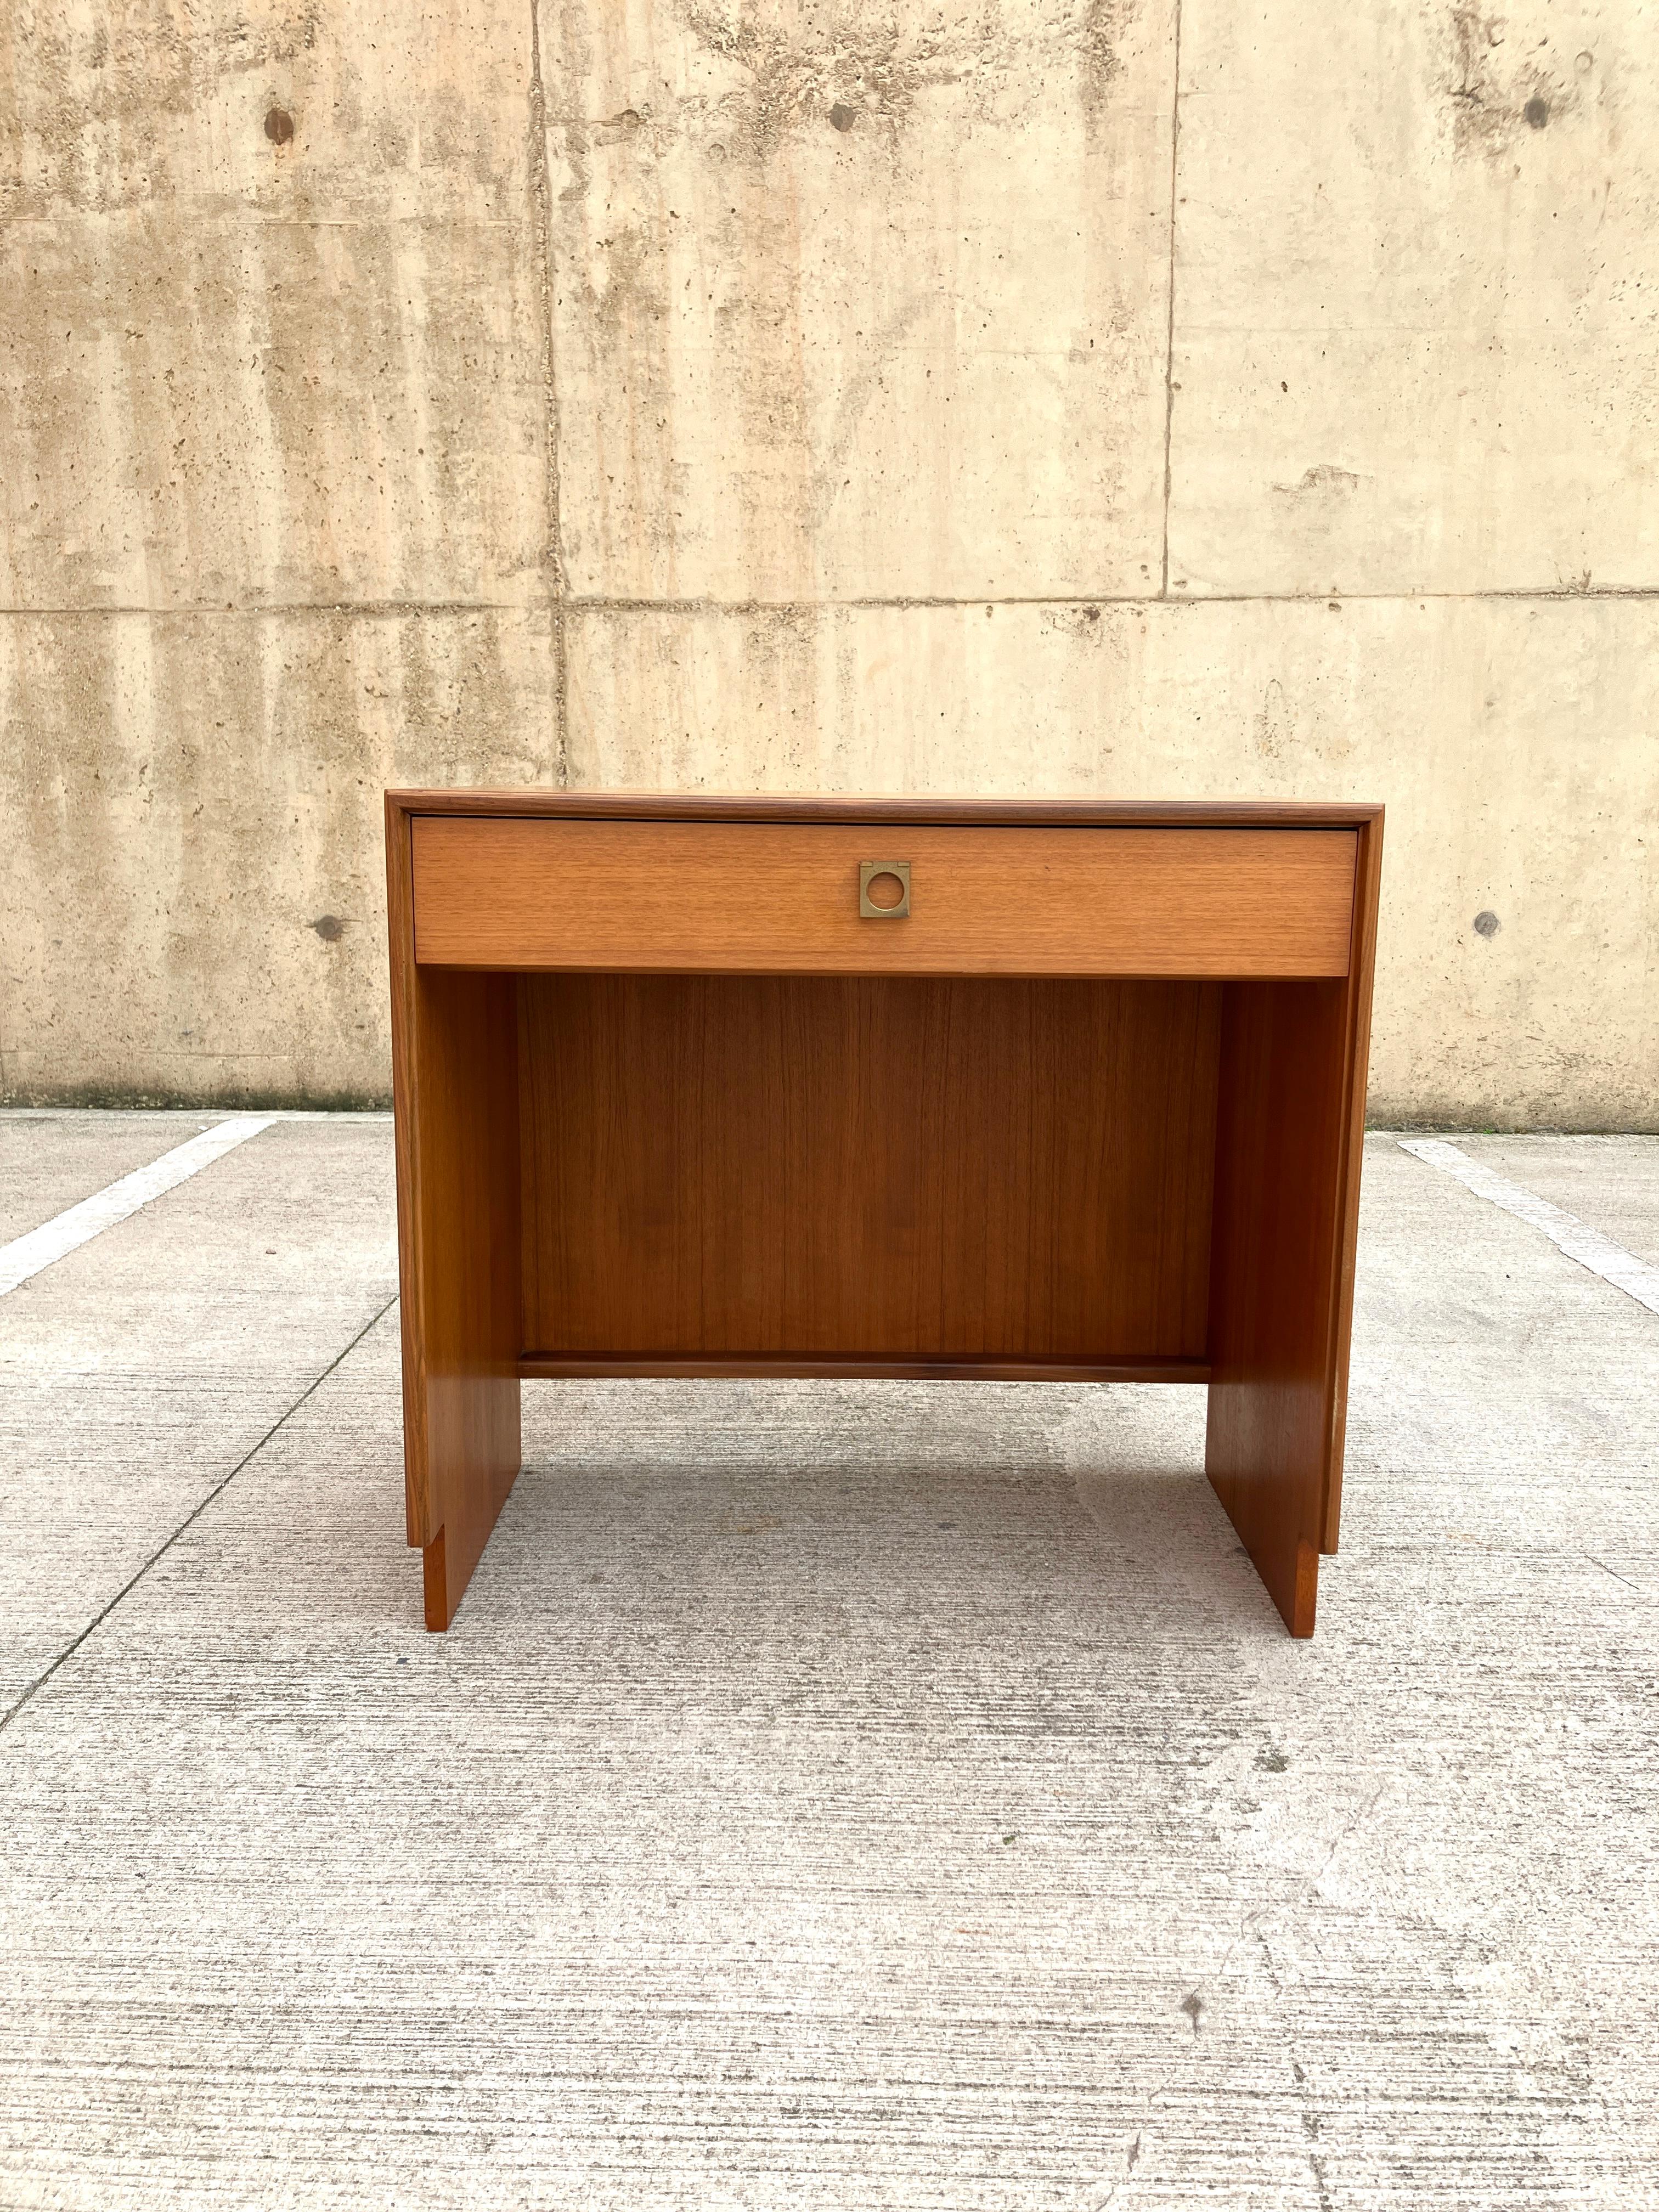 A compact mid-century desk/dressing table with a drawer by G Plan. 

Dating from 1967 and designed by Richard Bennett, this teak dressing table has a minimalist and modern design. The desk displays a clear Danish influence that many British